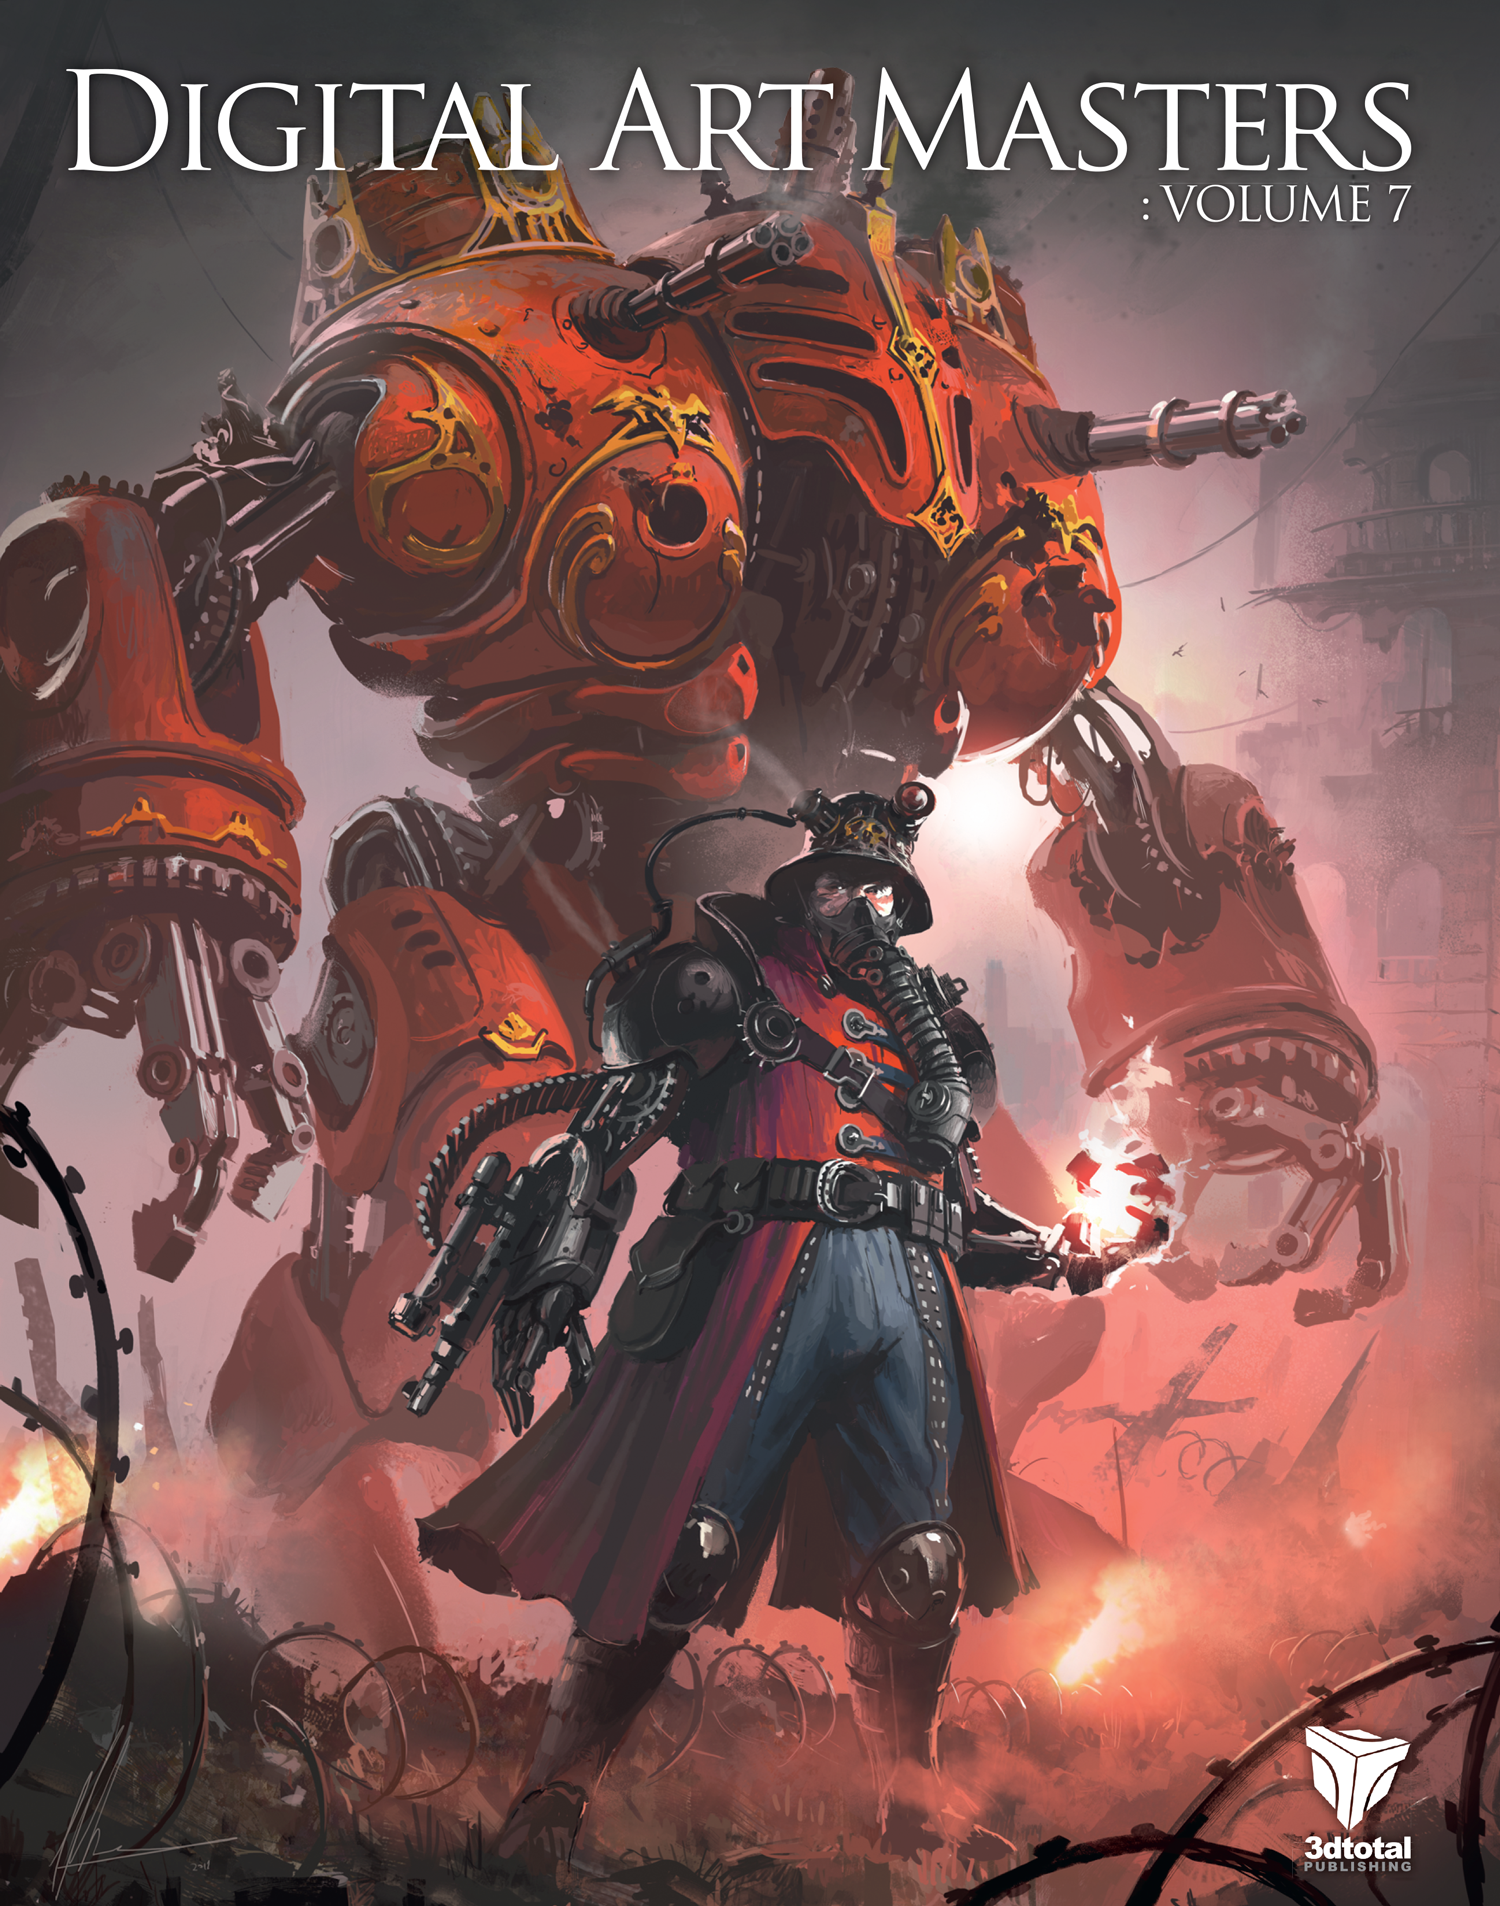 'Digital Art Masters: Volume 7' cover showing a steampunk/sci-fi scene of a giant combat mech towering over a half-robot man.